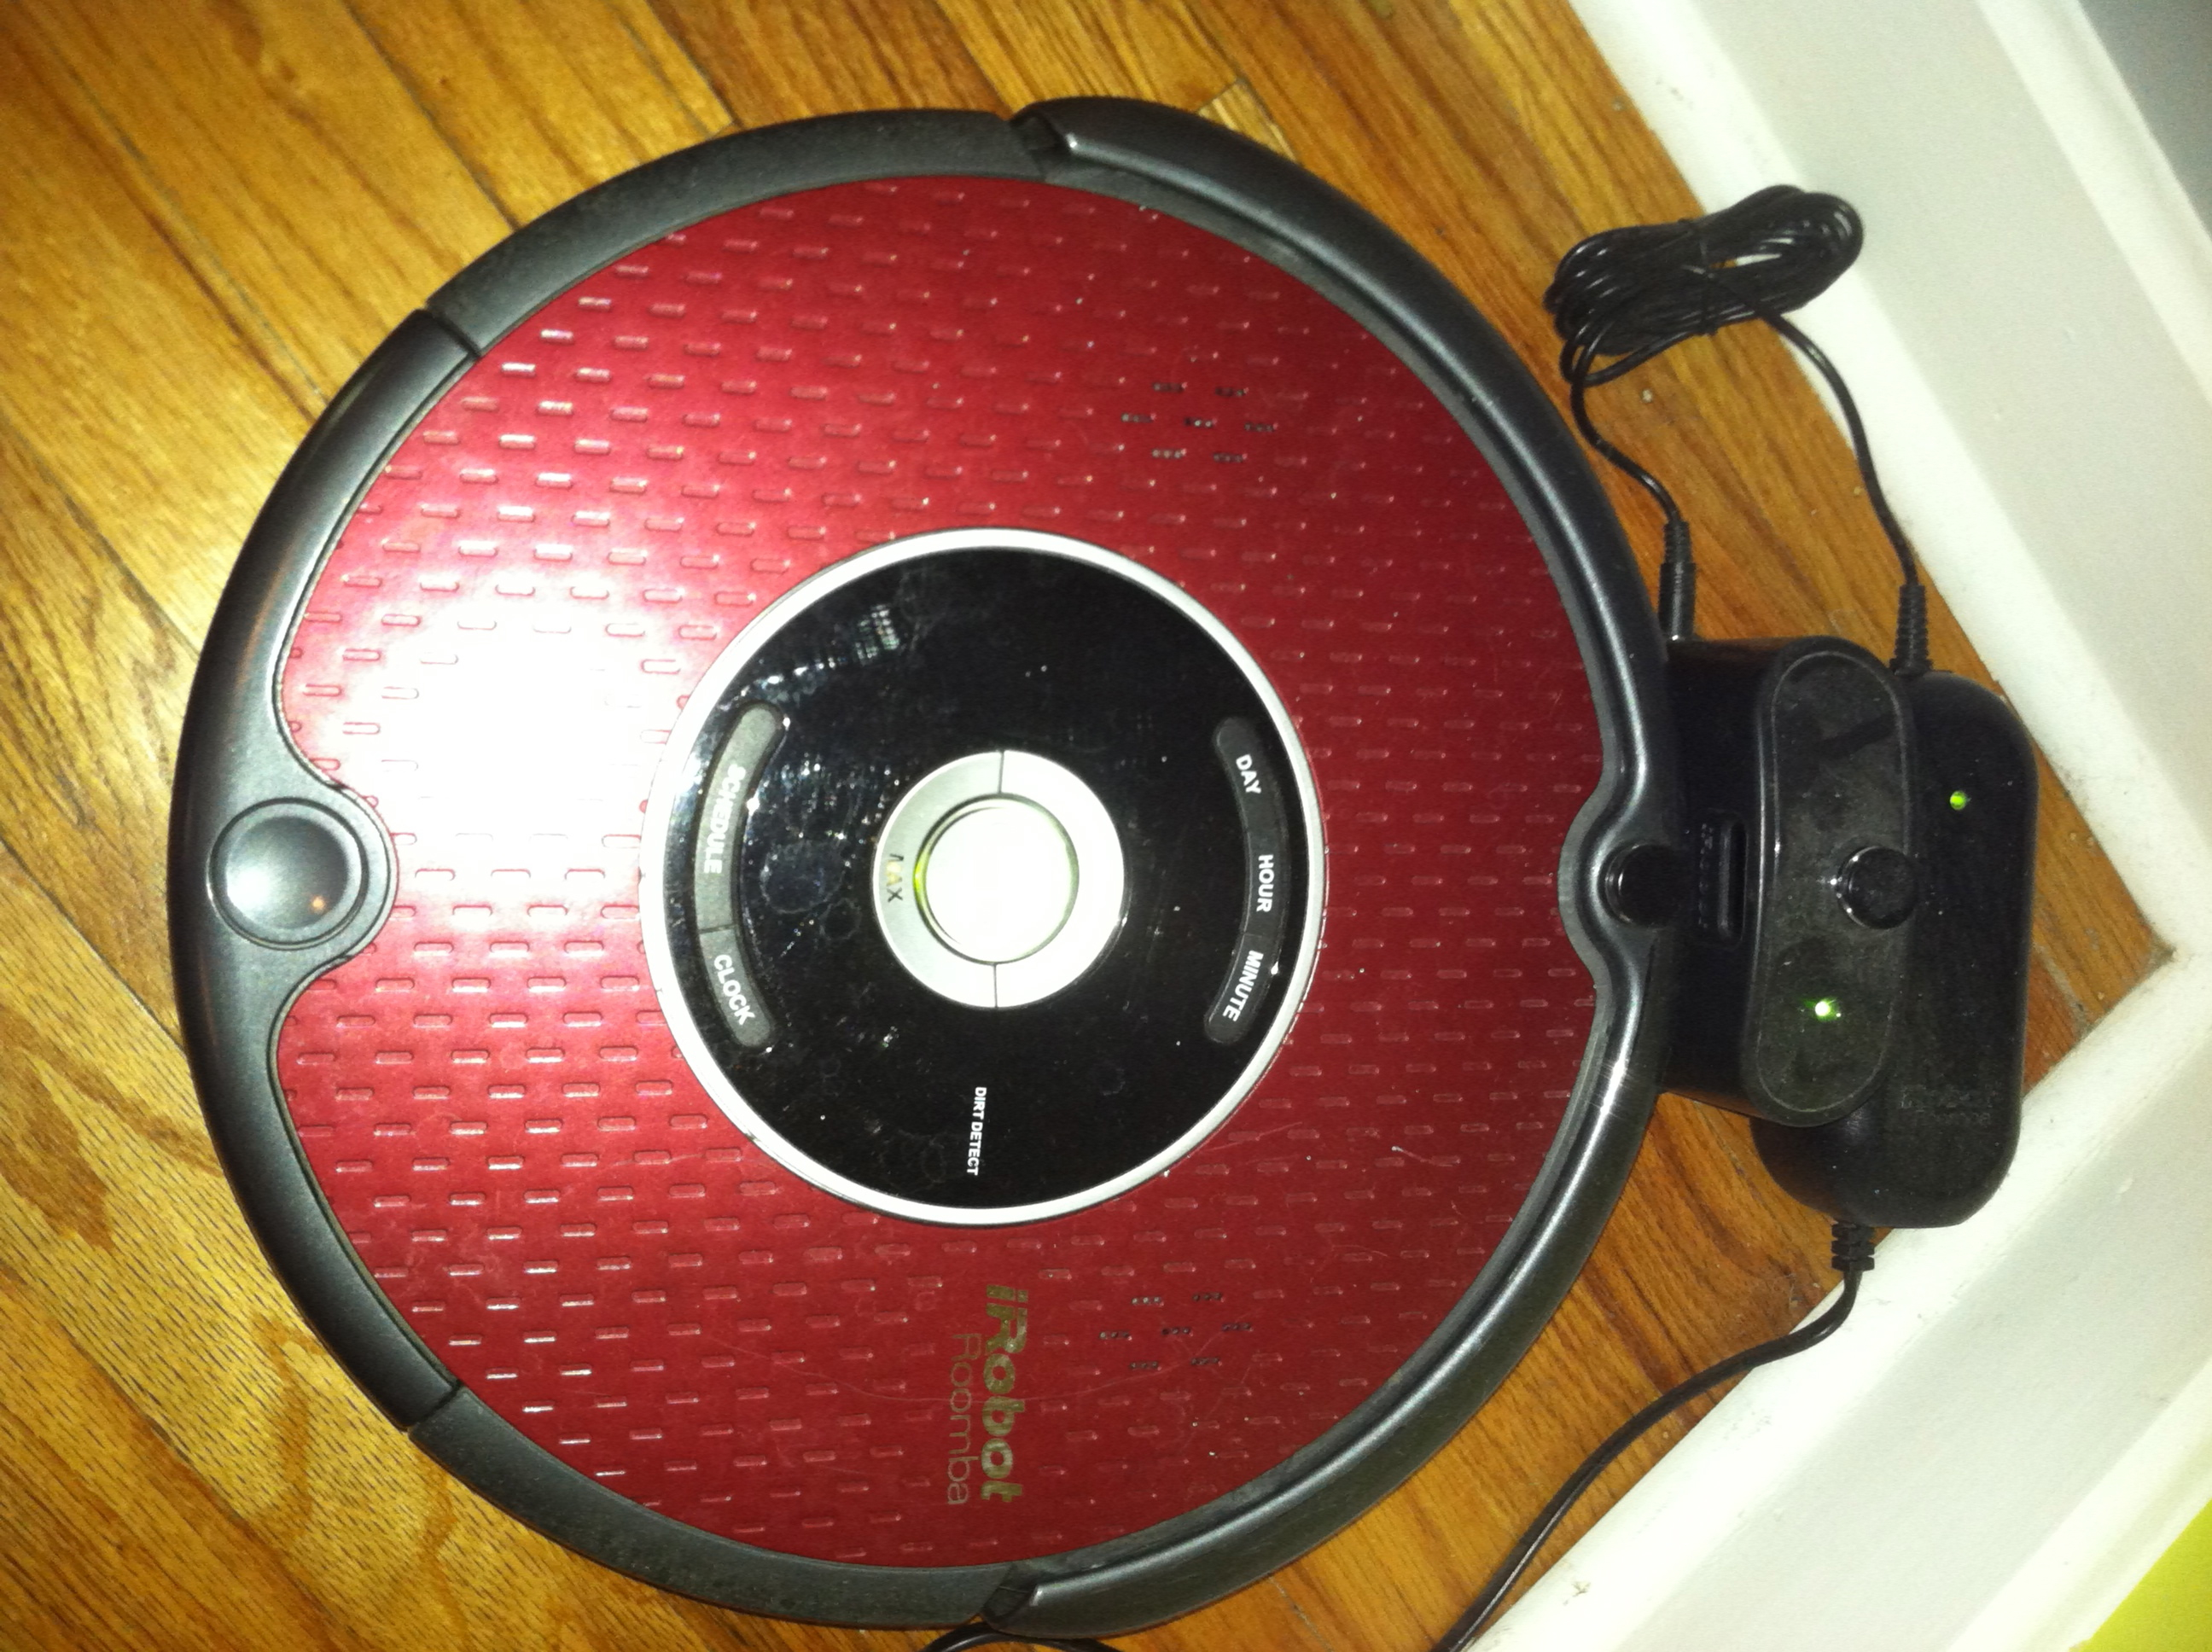 Review of the Roomba for Cleaning up Pet Hair